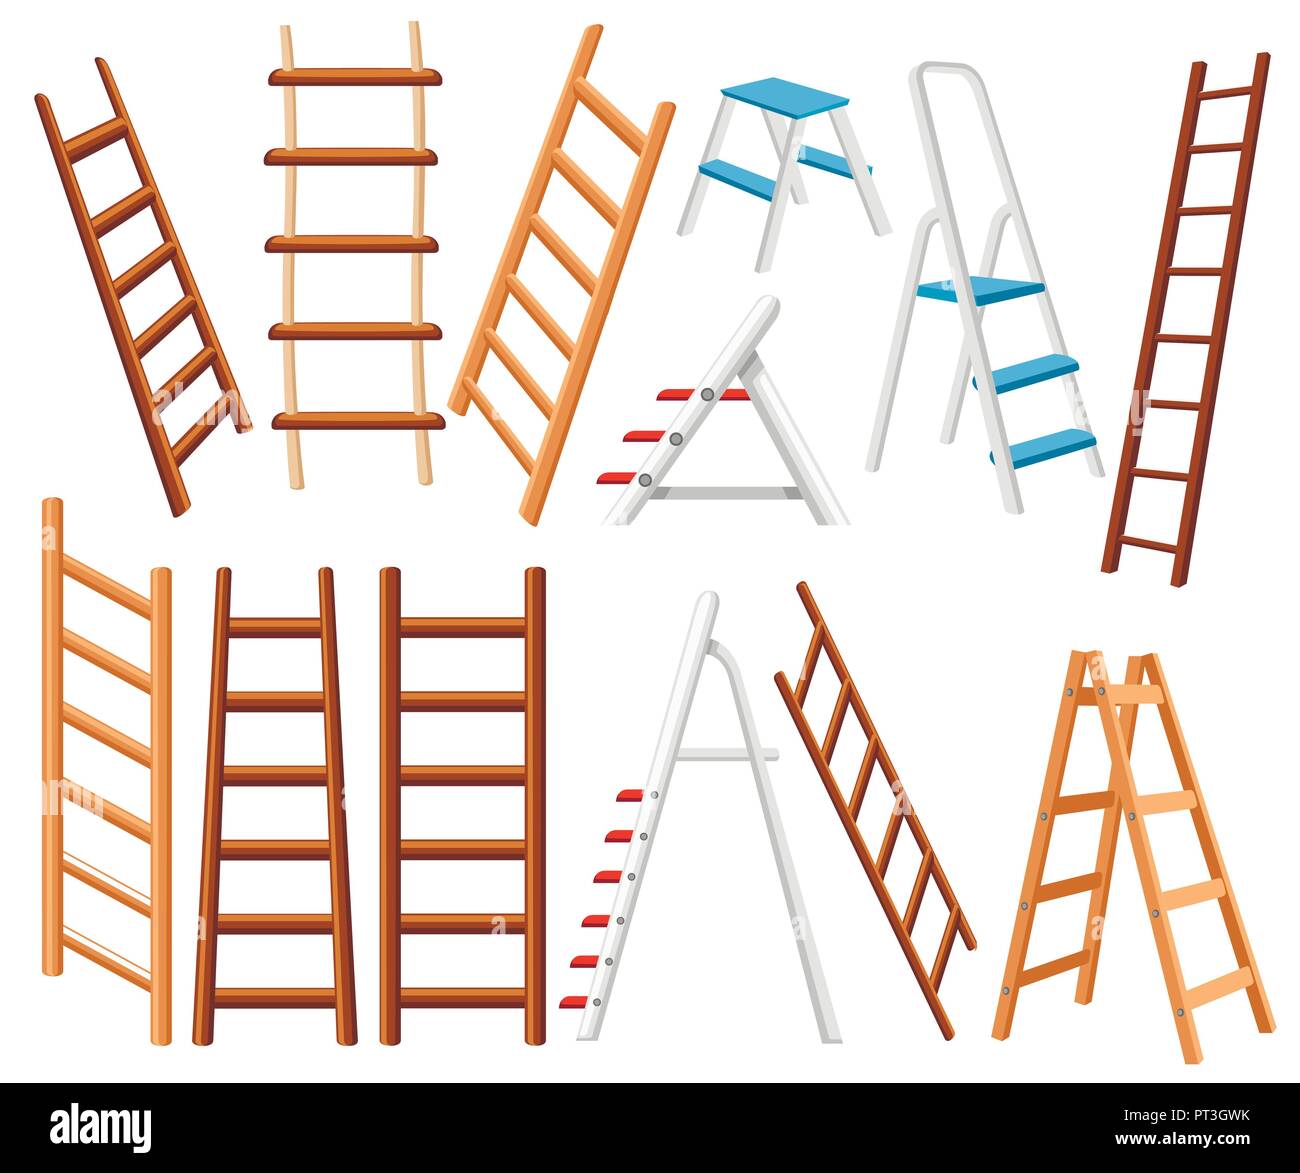 Collection of metal and wooden ladders. Different types of stepladders. Flat vector illustration isolated on white background. Stock Vector